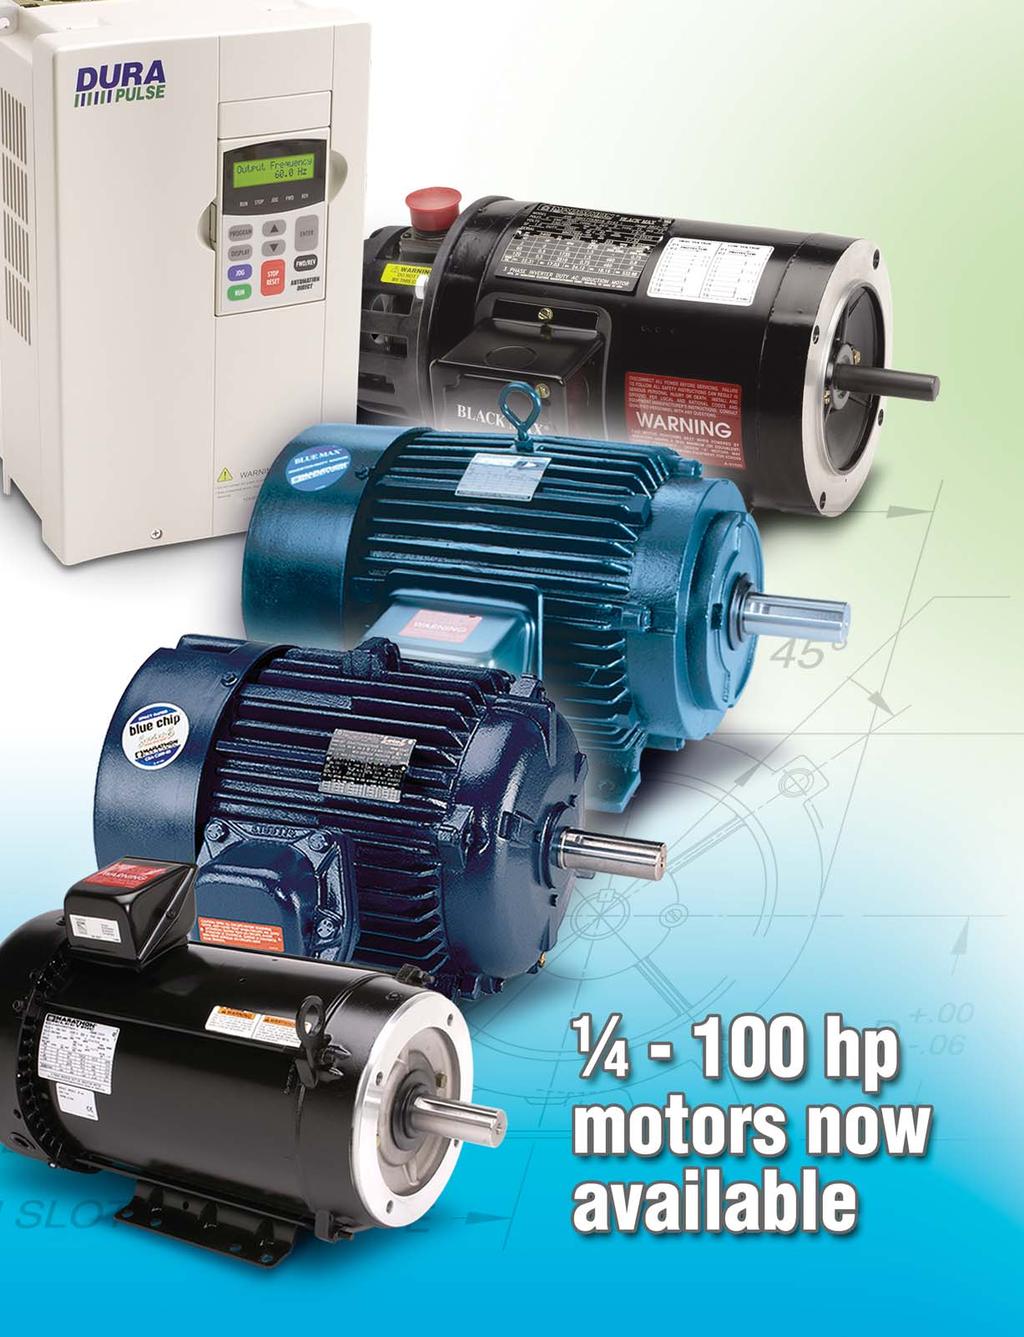 AUTOMATIONDIRECT is proud to partner with Marathon Electric to provide our customers with premium quality motors at great prices.